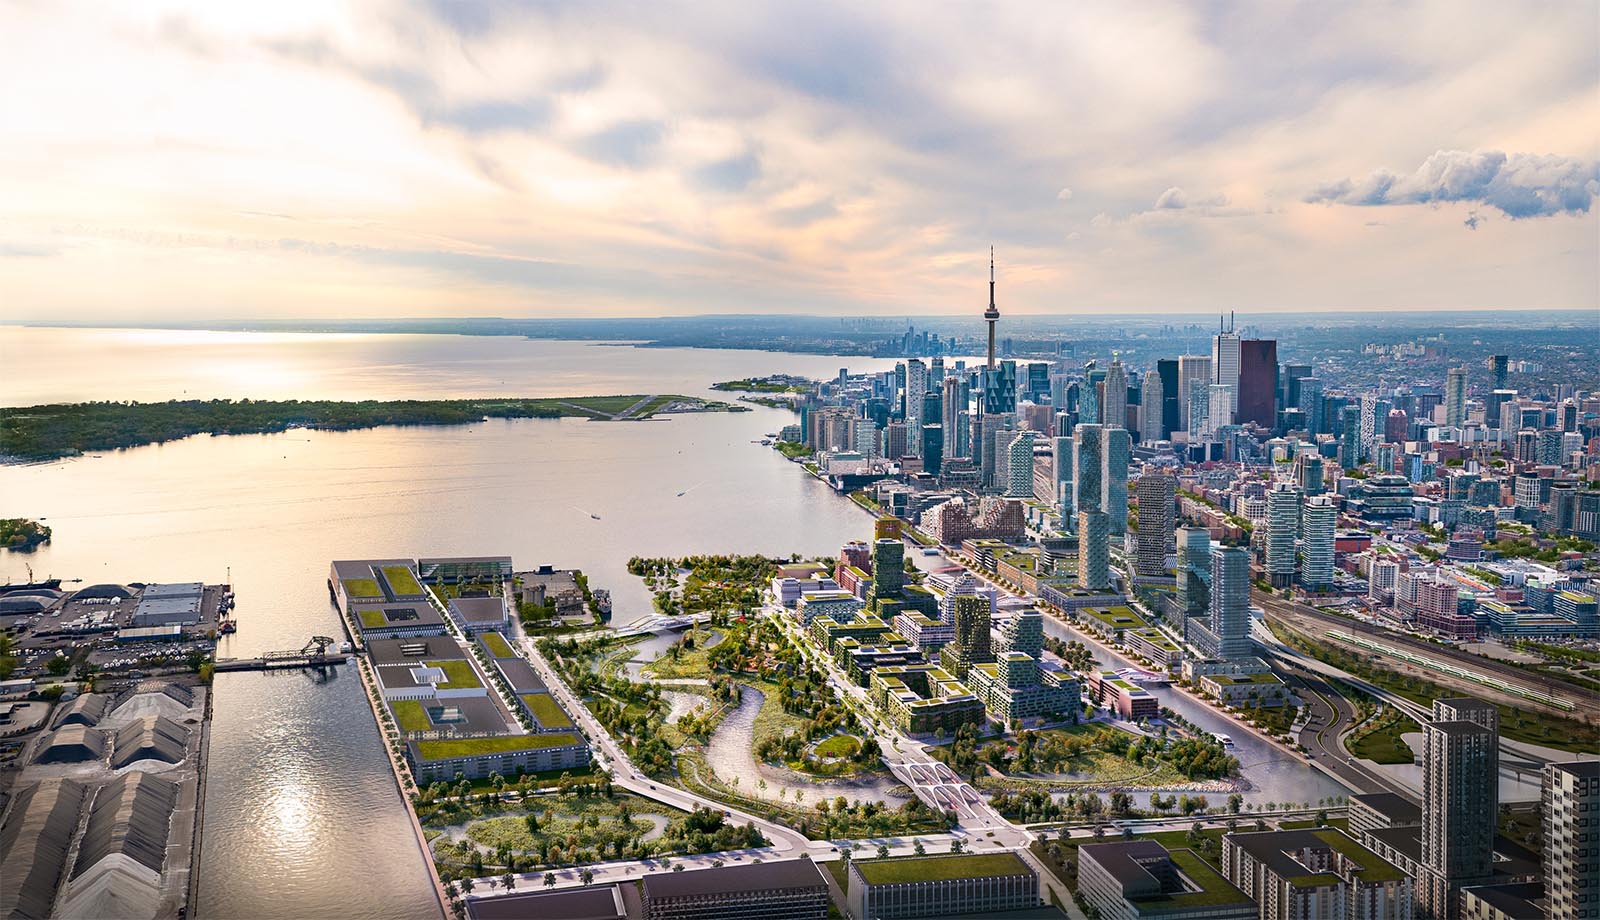 A rendering of what Villiers Island in Toronto should look like when fully completed. Illustration: Waterfront Toronto.